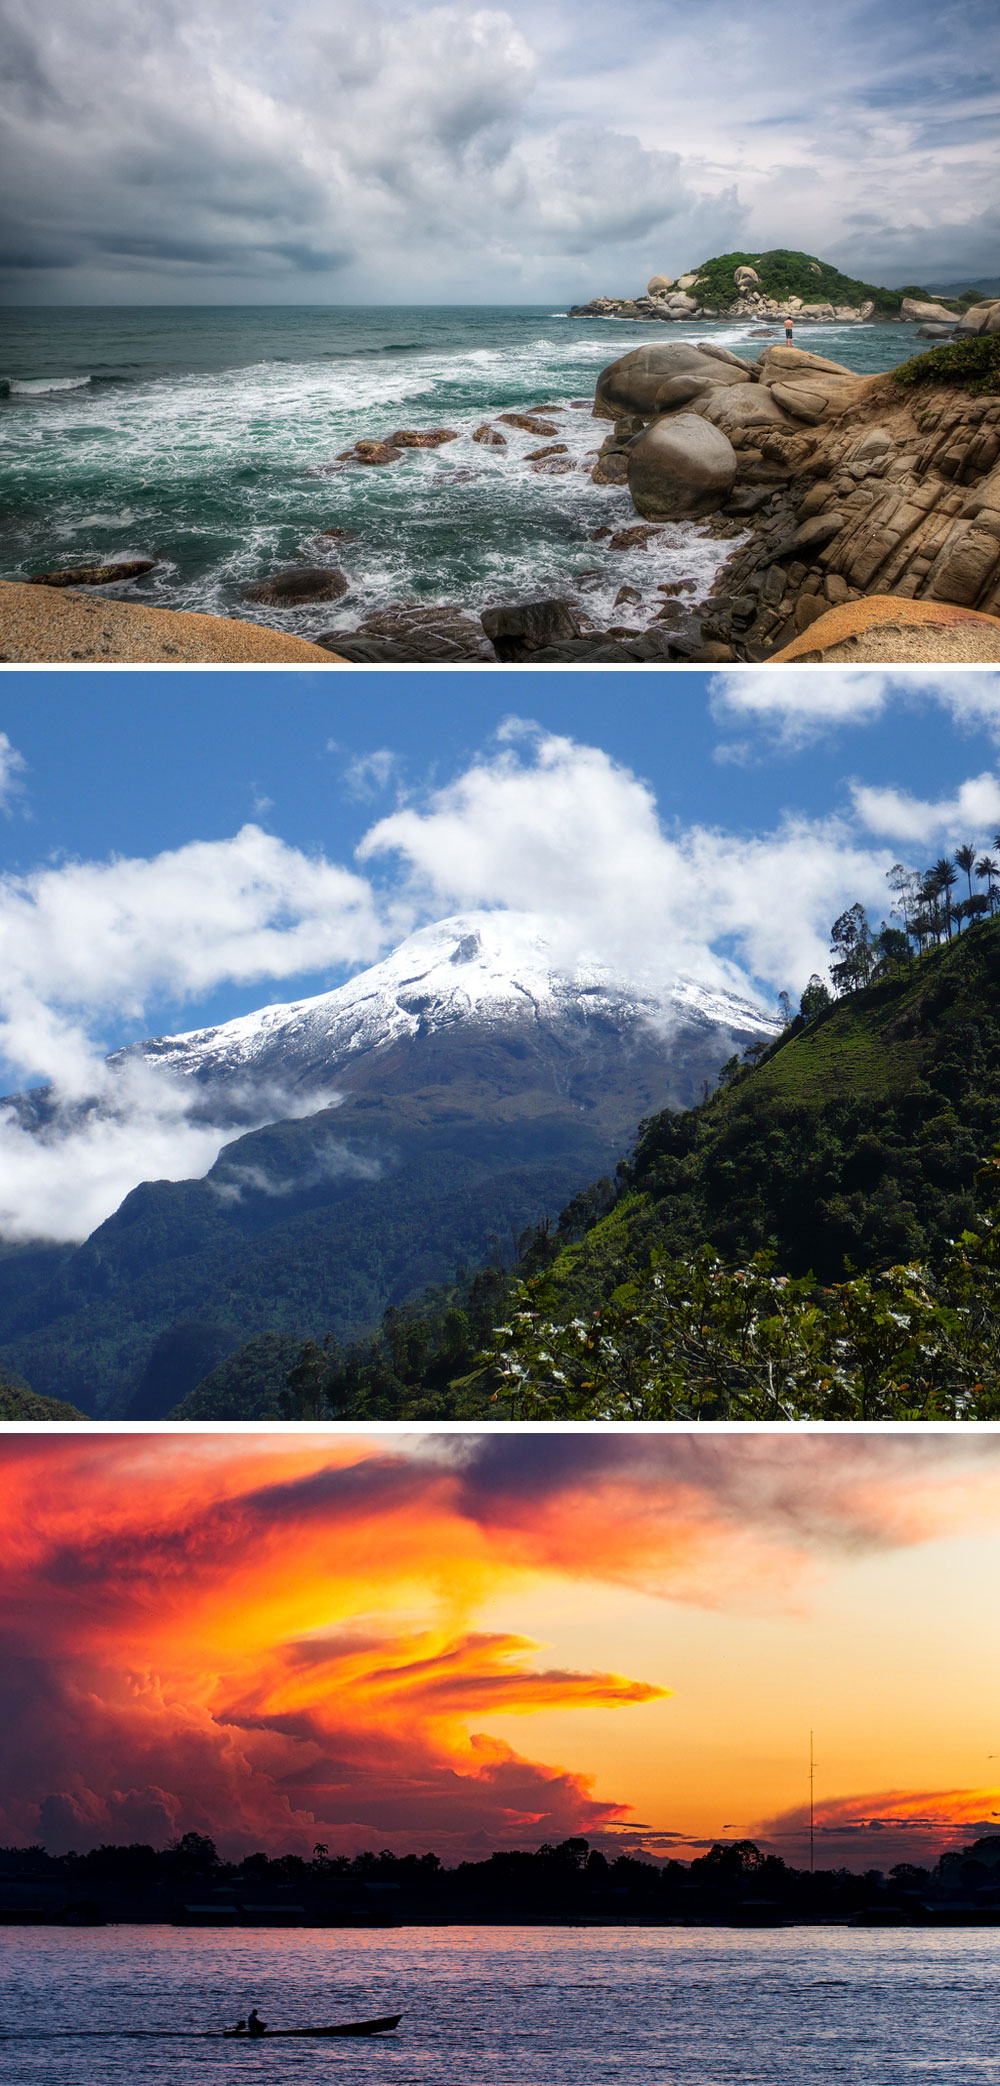 Fact: Colombia's landscape includes sea, mountains, rivers and rainforest